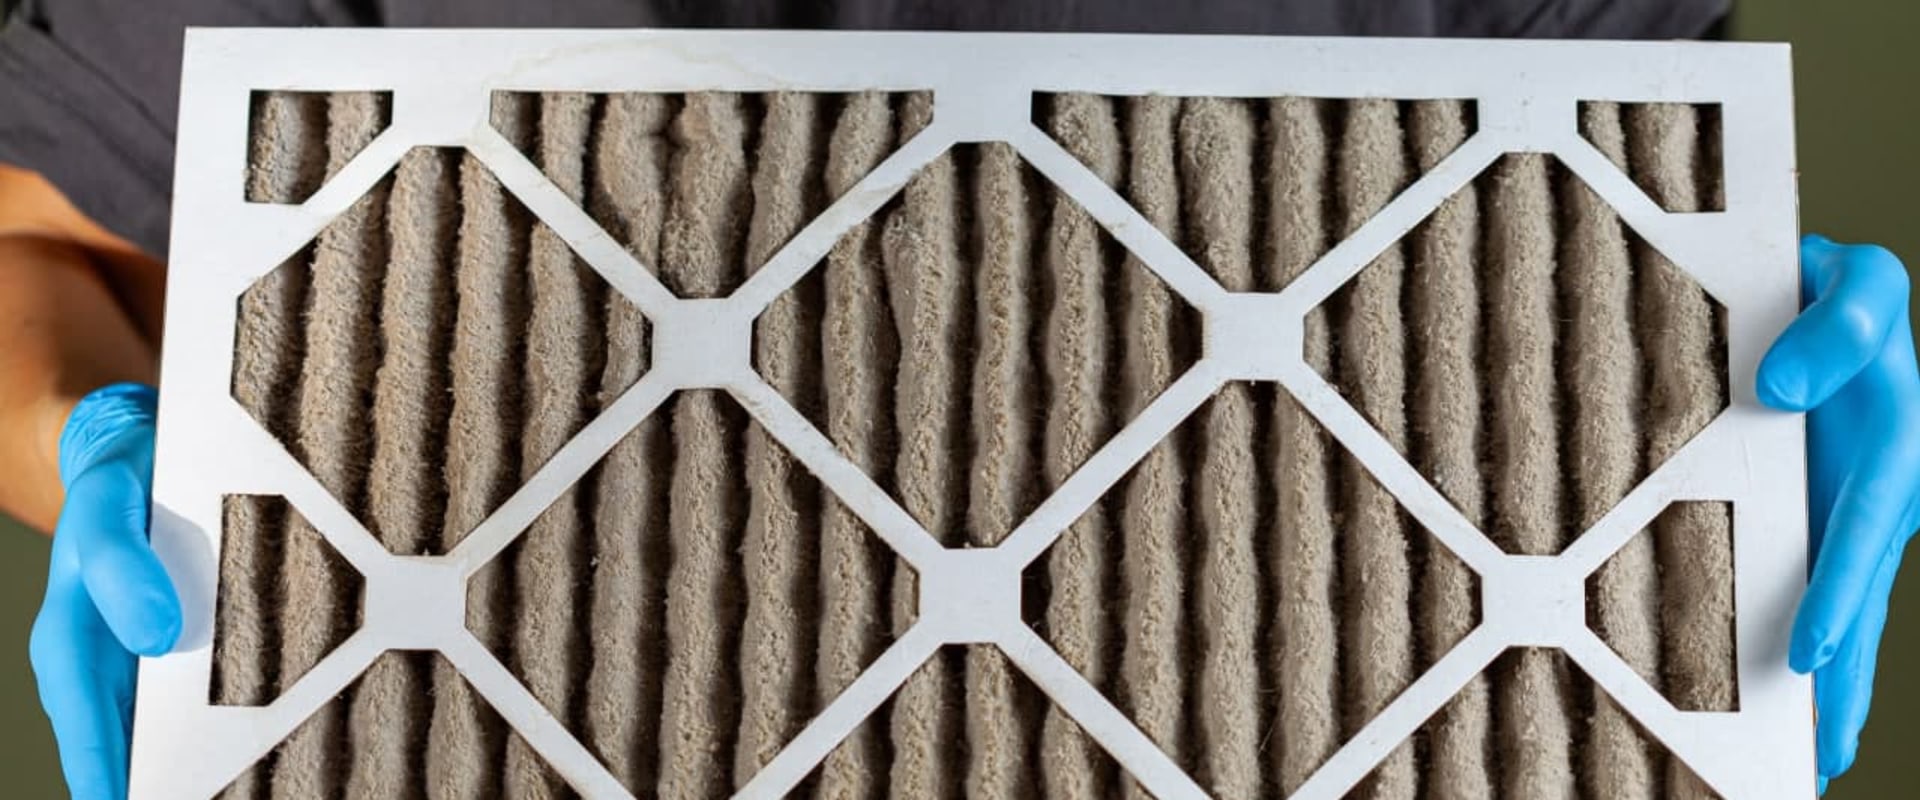 How Often Should You Change Your 4 Inch Furnace Filter?